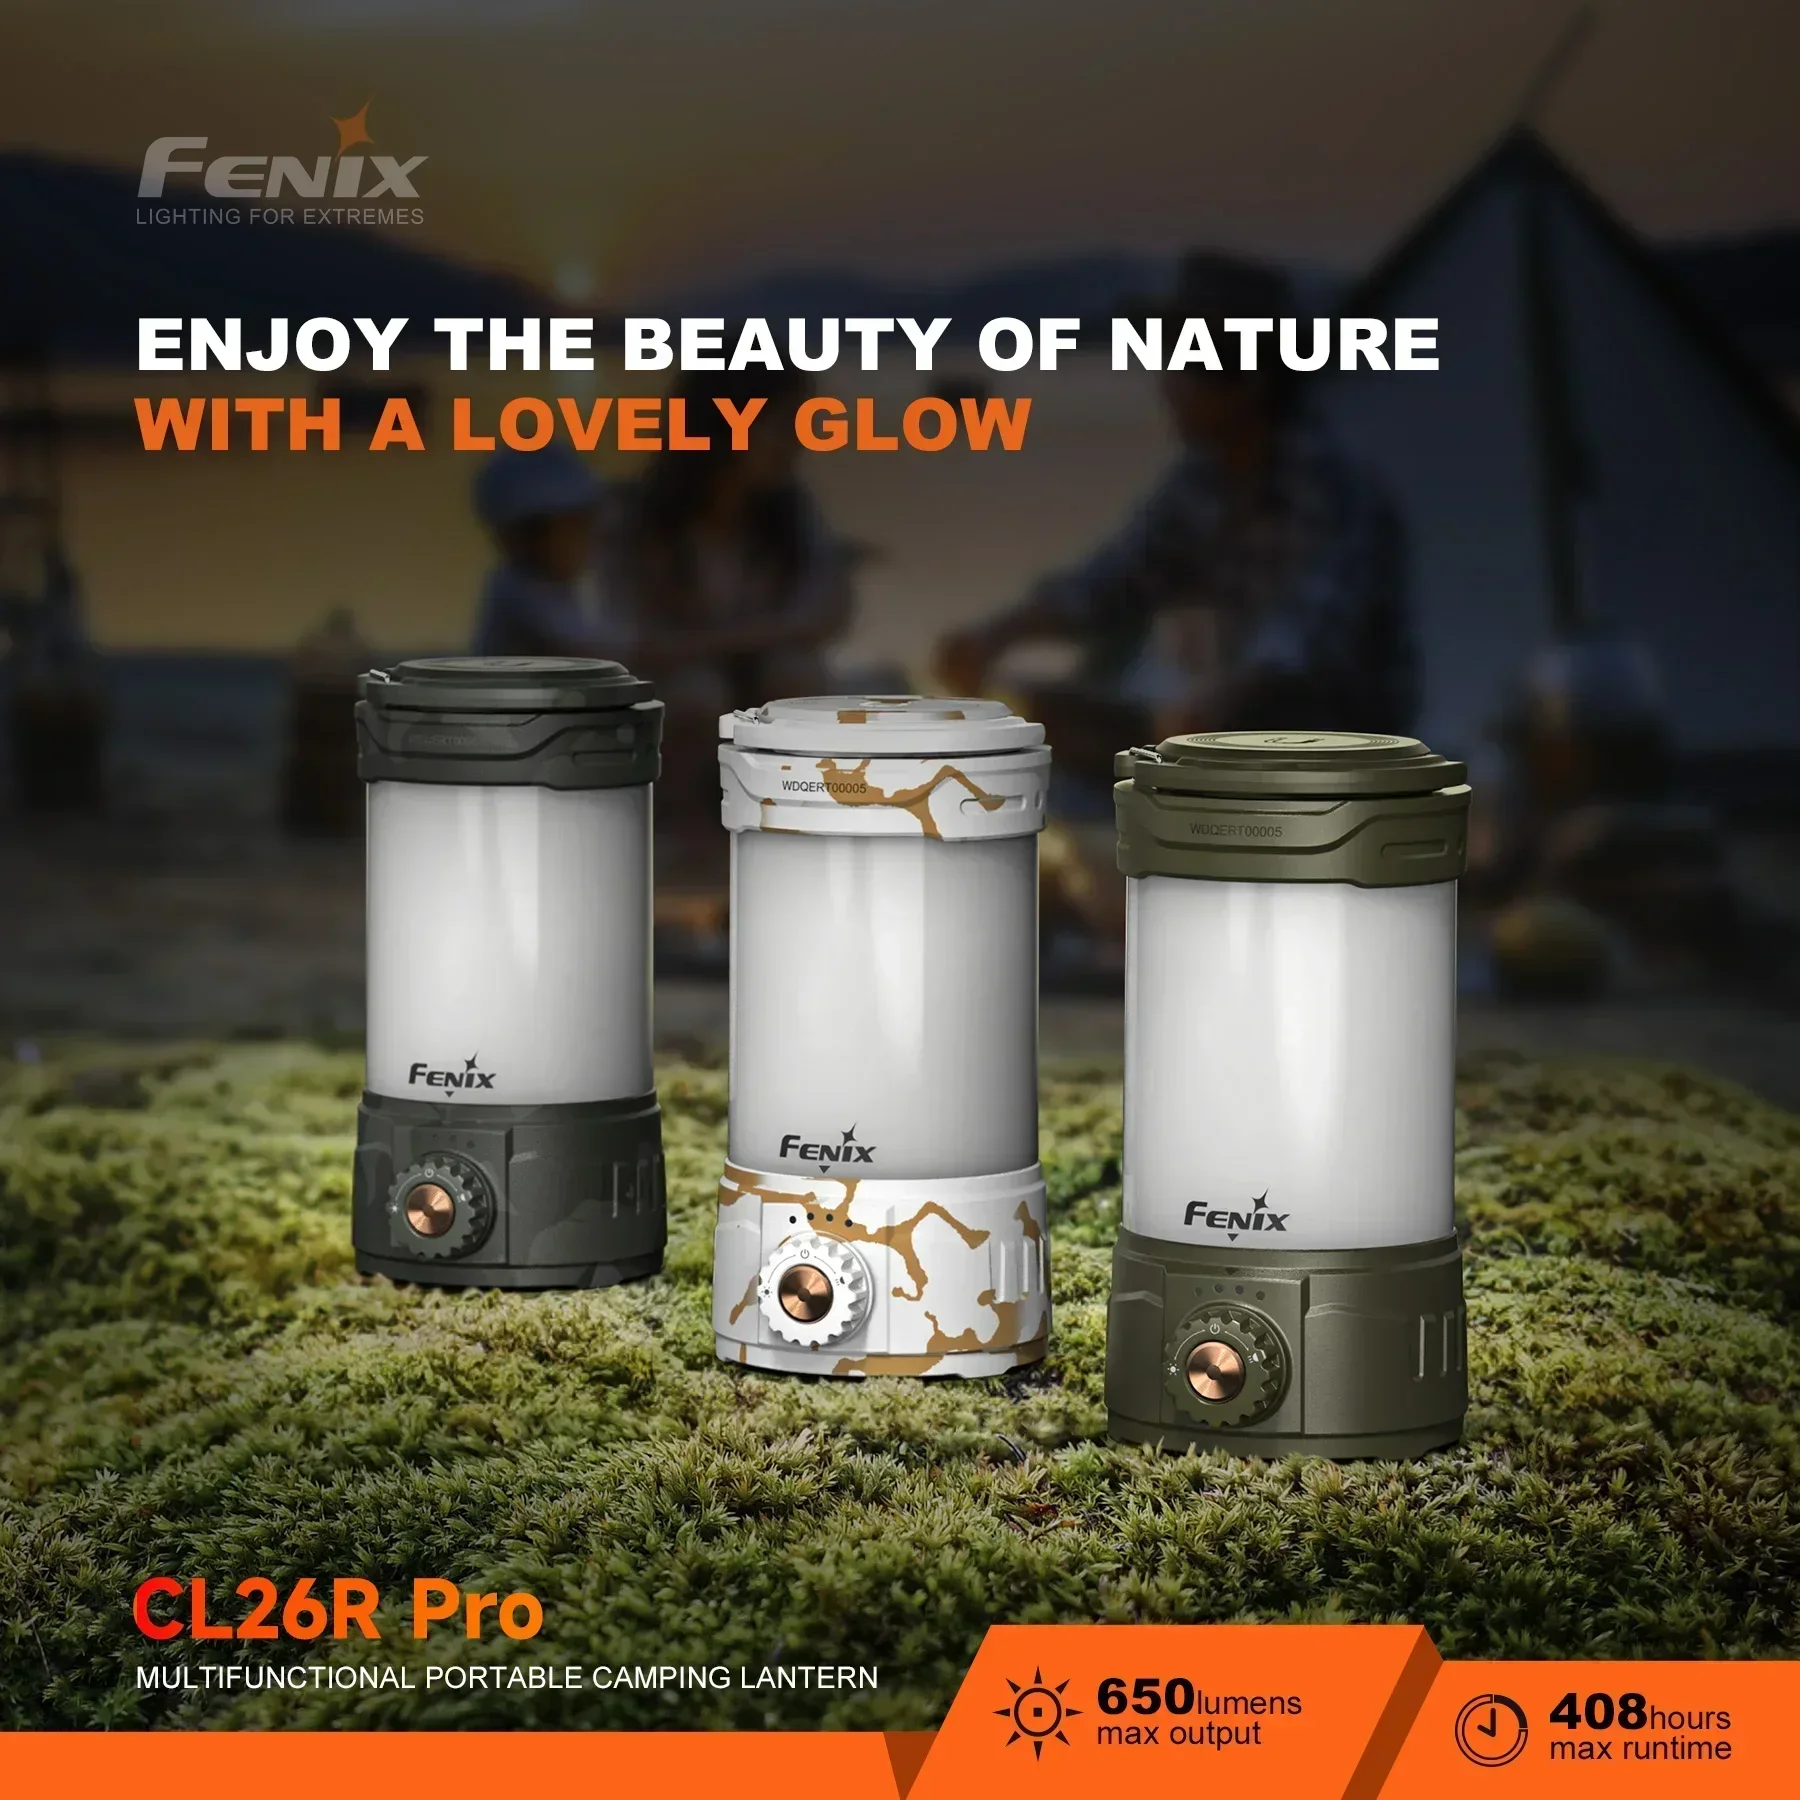 

FENIX CL26R PRO Multifunctional Portable Camping Lantern Power Bank USB Type-C Charging Camping Light With Battery